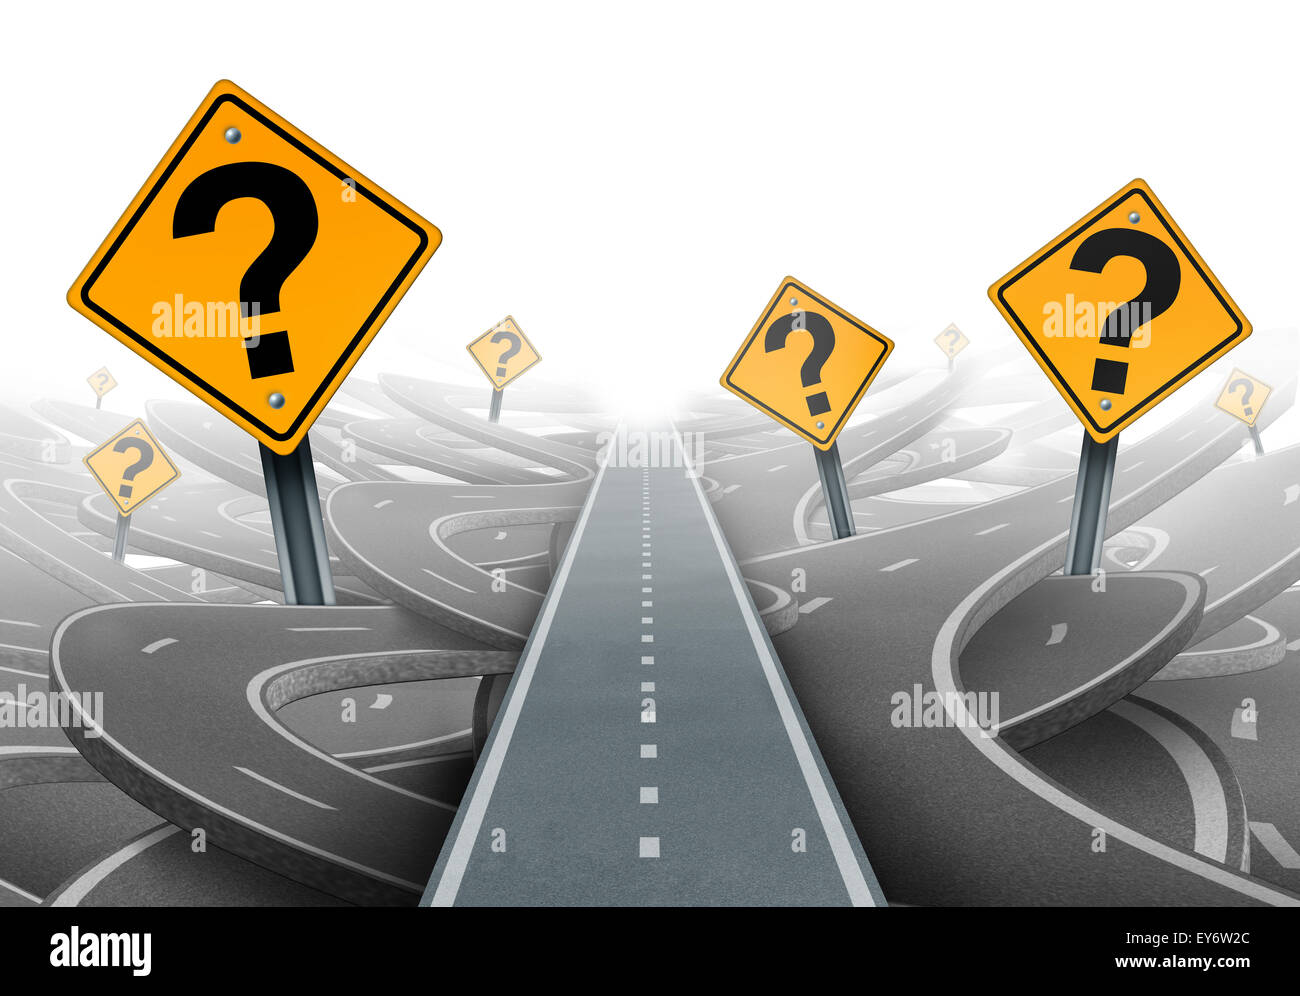 Solution and strategy path questions and clear planning for ideas in business leadership with a straight path to success choosing the right strategic plan with yellow traffic signs cutting through a maze of highways. Stock Photo